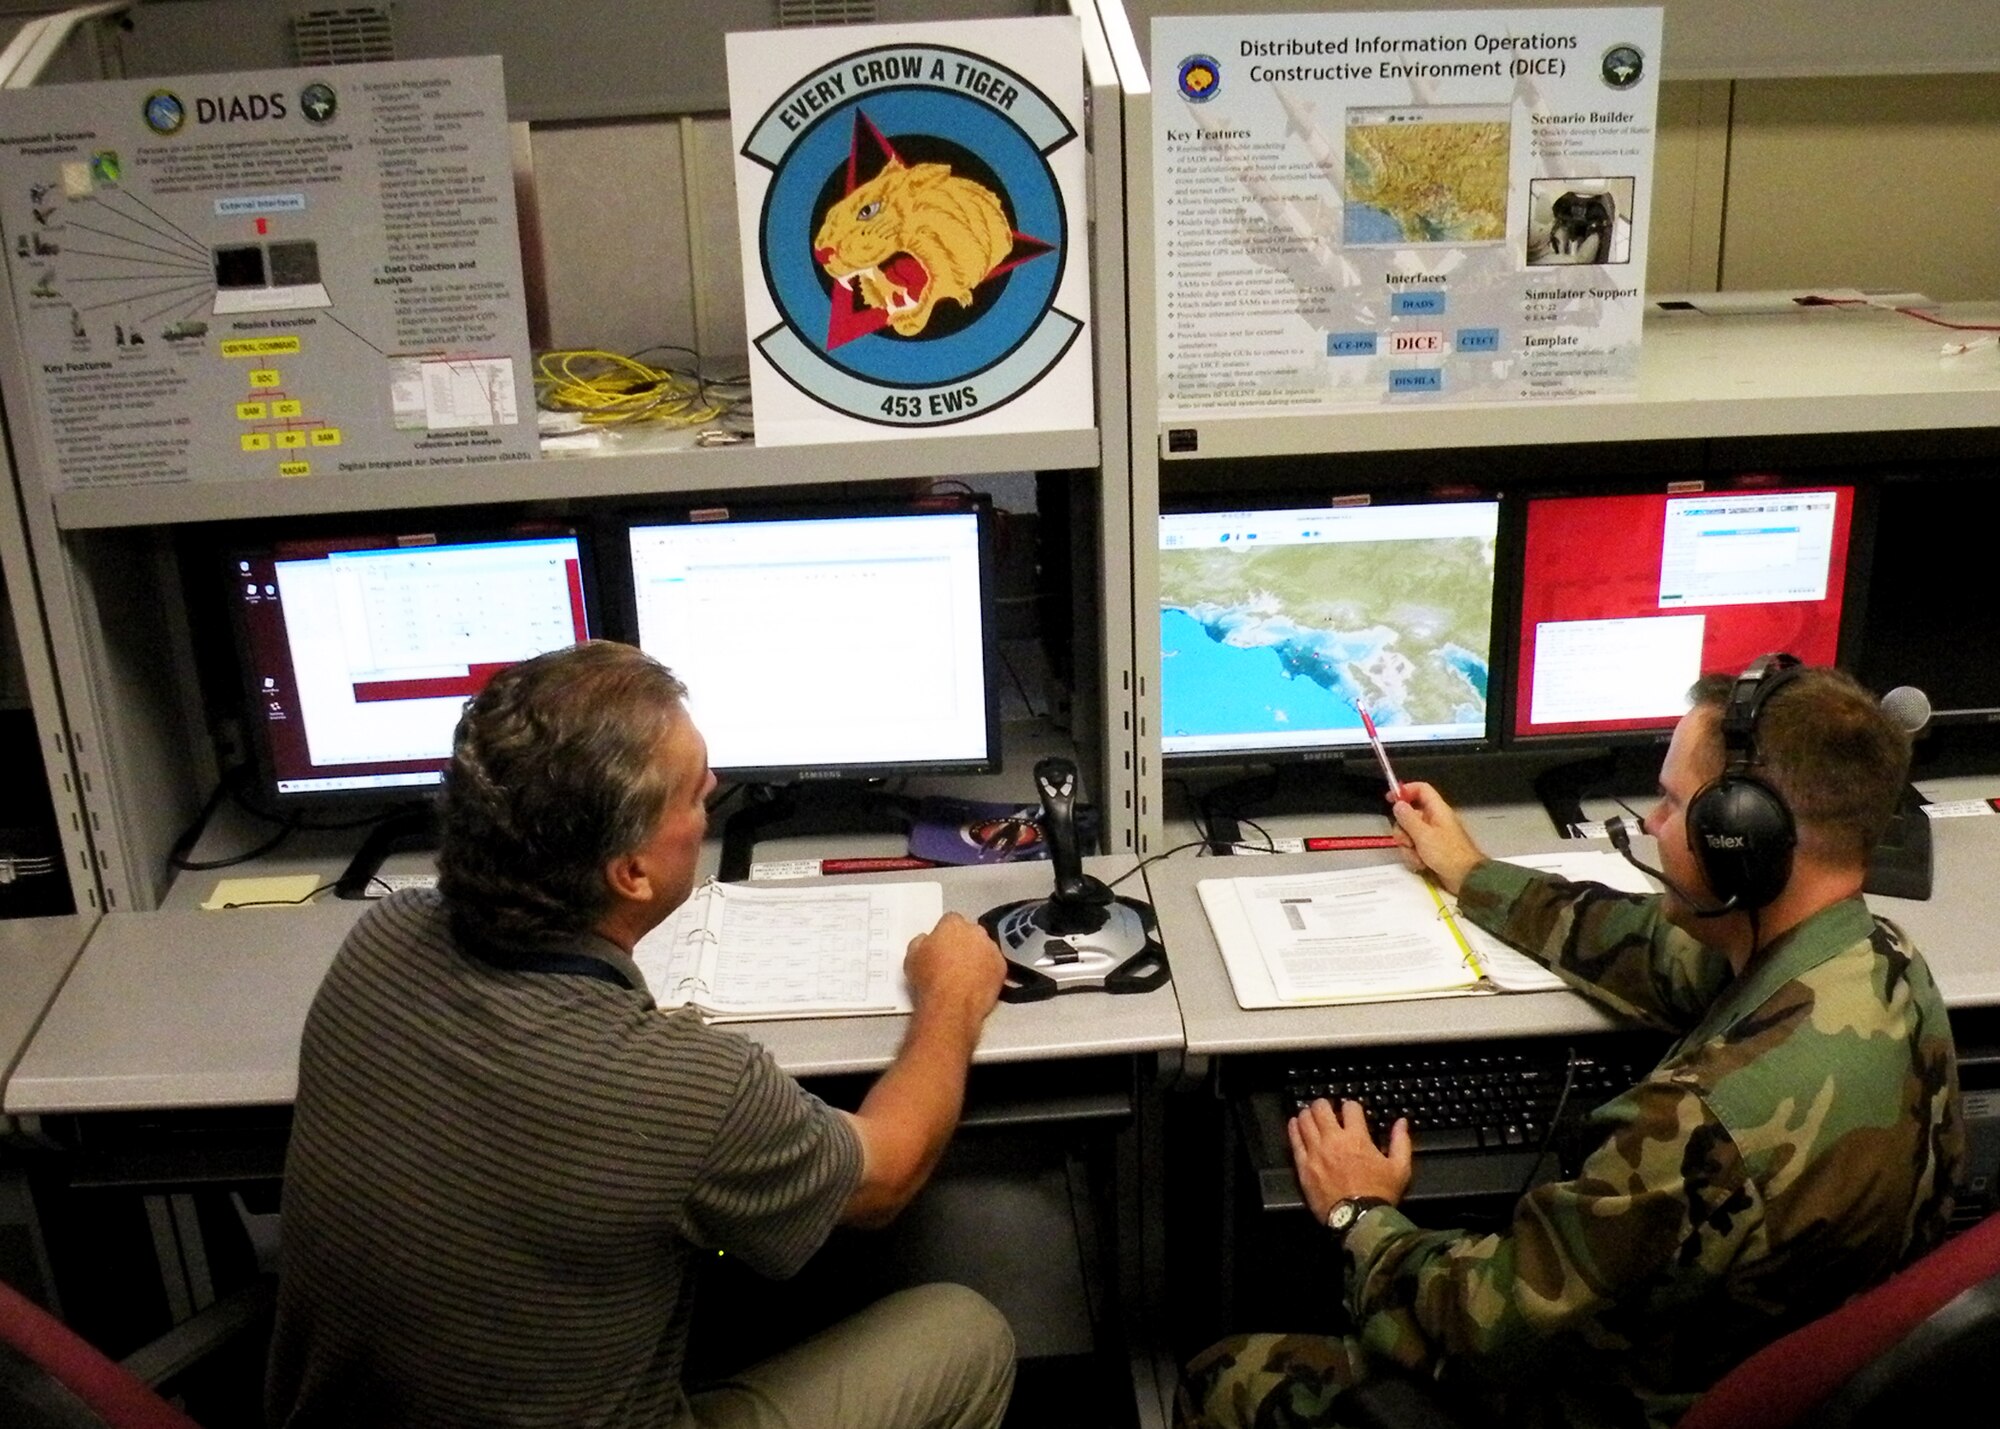 Members of the 453rd Electronic Warfare Squadron provide assistance during Virtual Flag. The squadron’s mission is providing timely, tailored and vigilant electronic warfare analysis and support down range to joint and coalition warfighters.  The squadron, located at Lackland Air Force Base, Texas, is part of the 53rd Wing headquartered at Eglin. (Courtesy Photo)